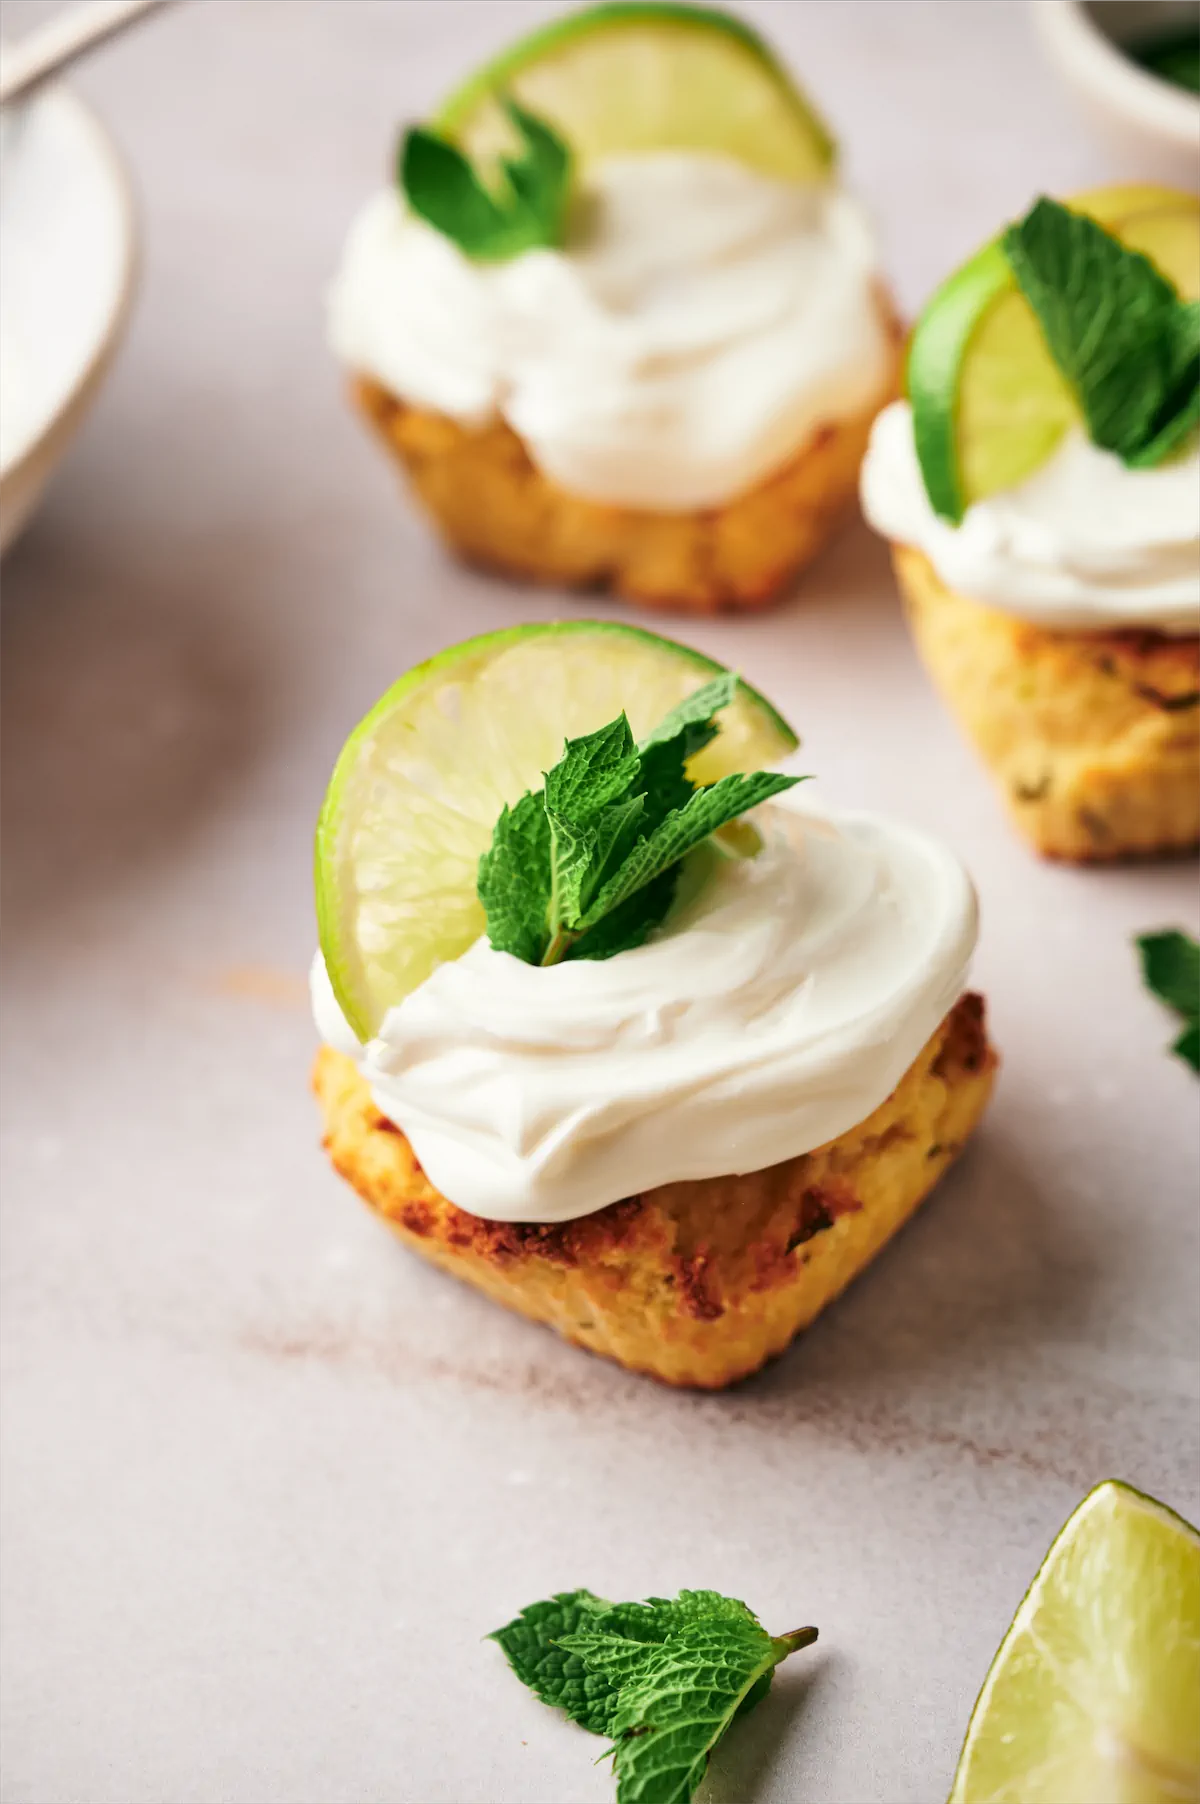 Keto mojito cupcakes, adorned with cream cheese frosting, a lemon wedge, and fresh mint leaves arranged on a table.